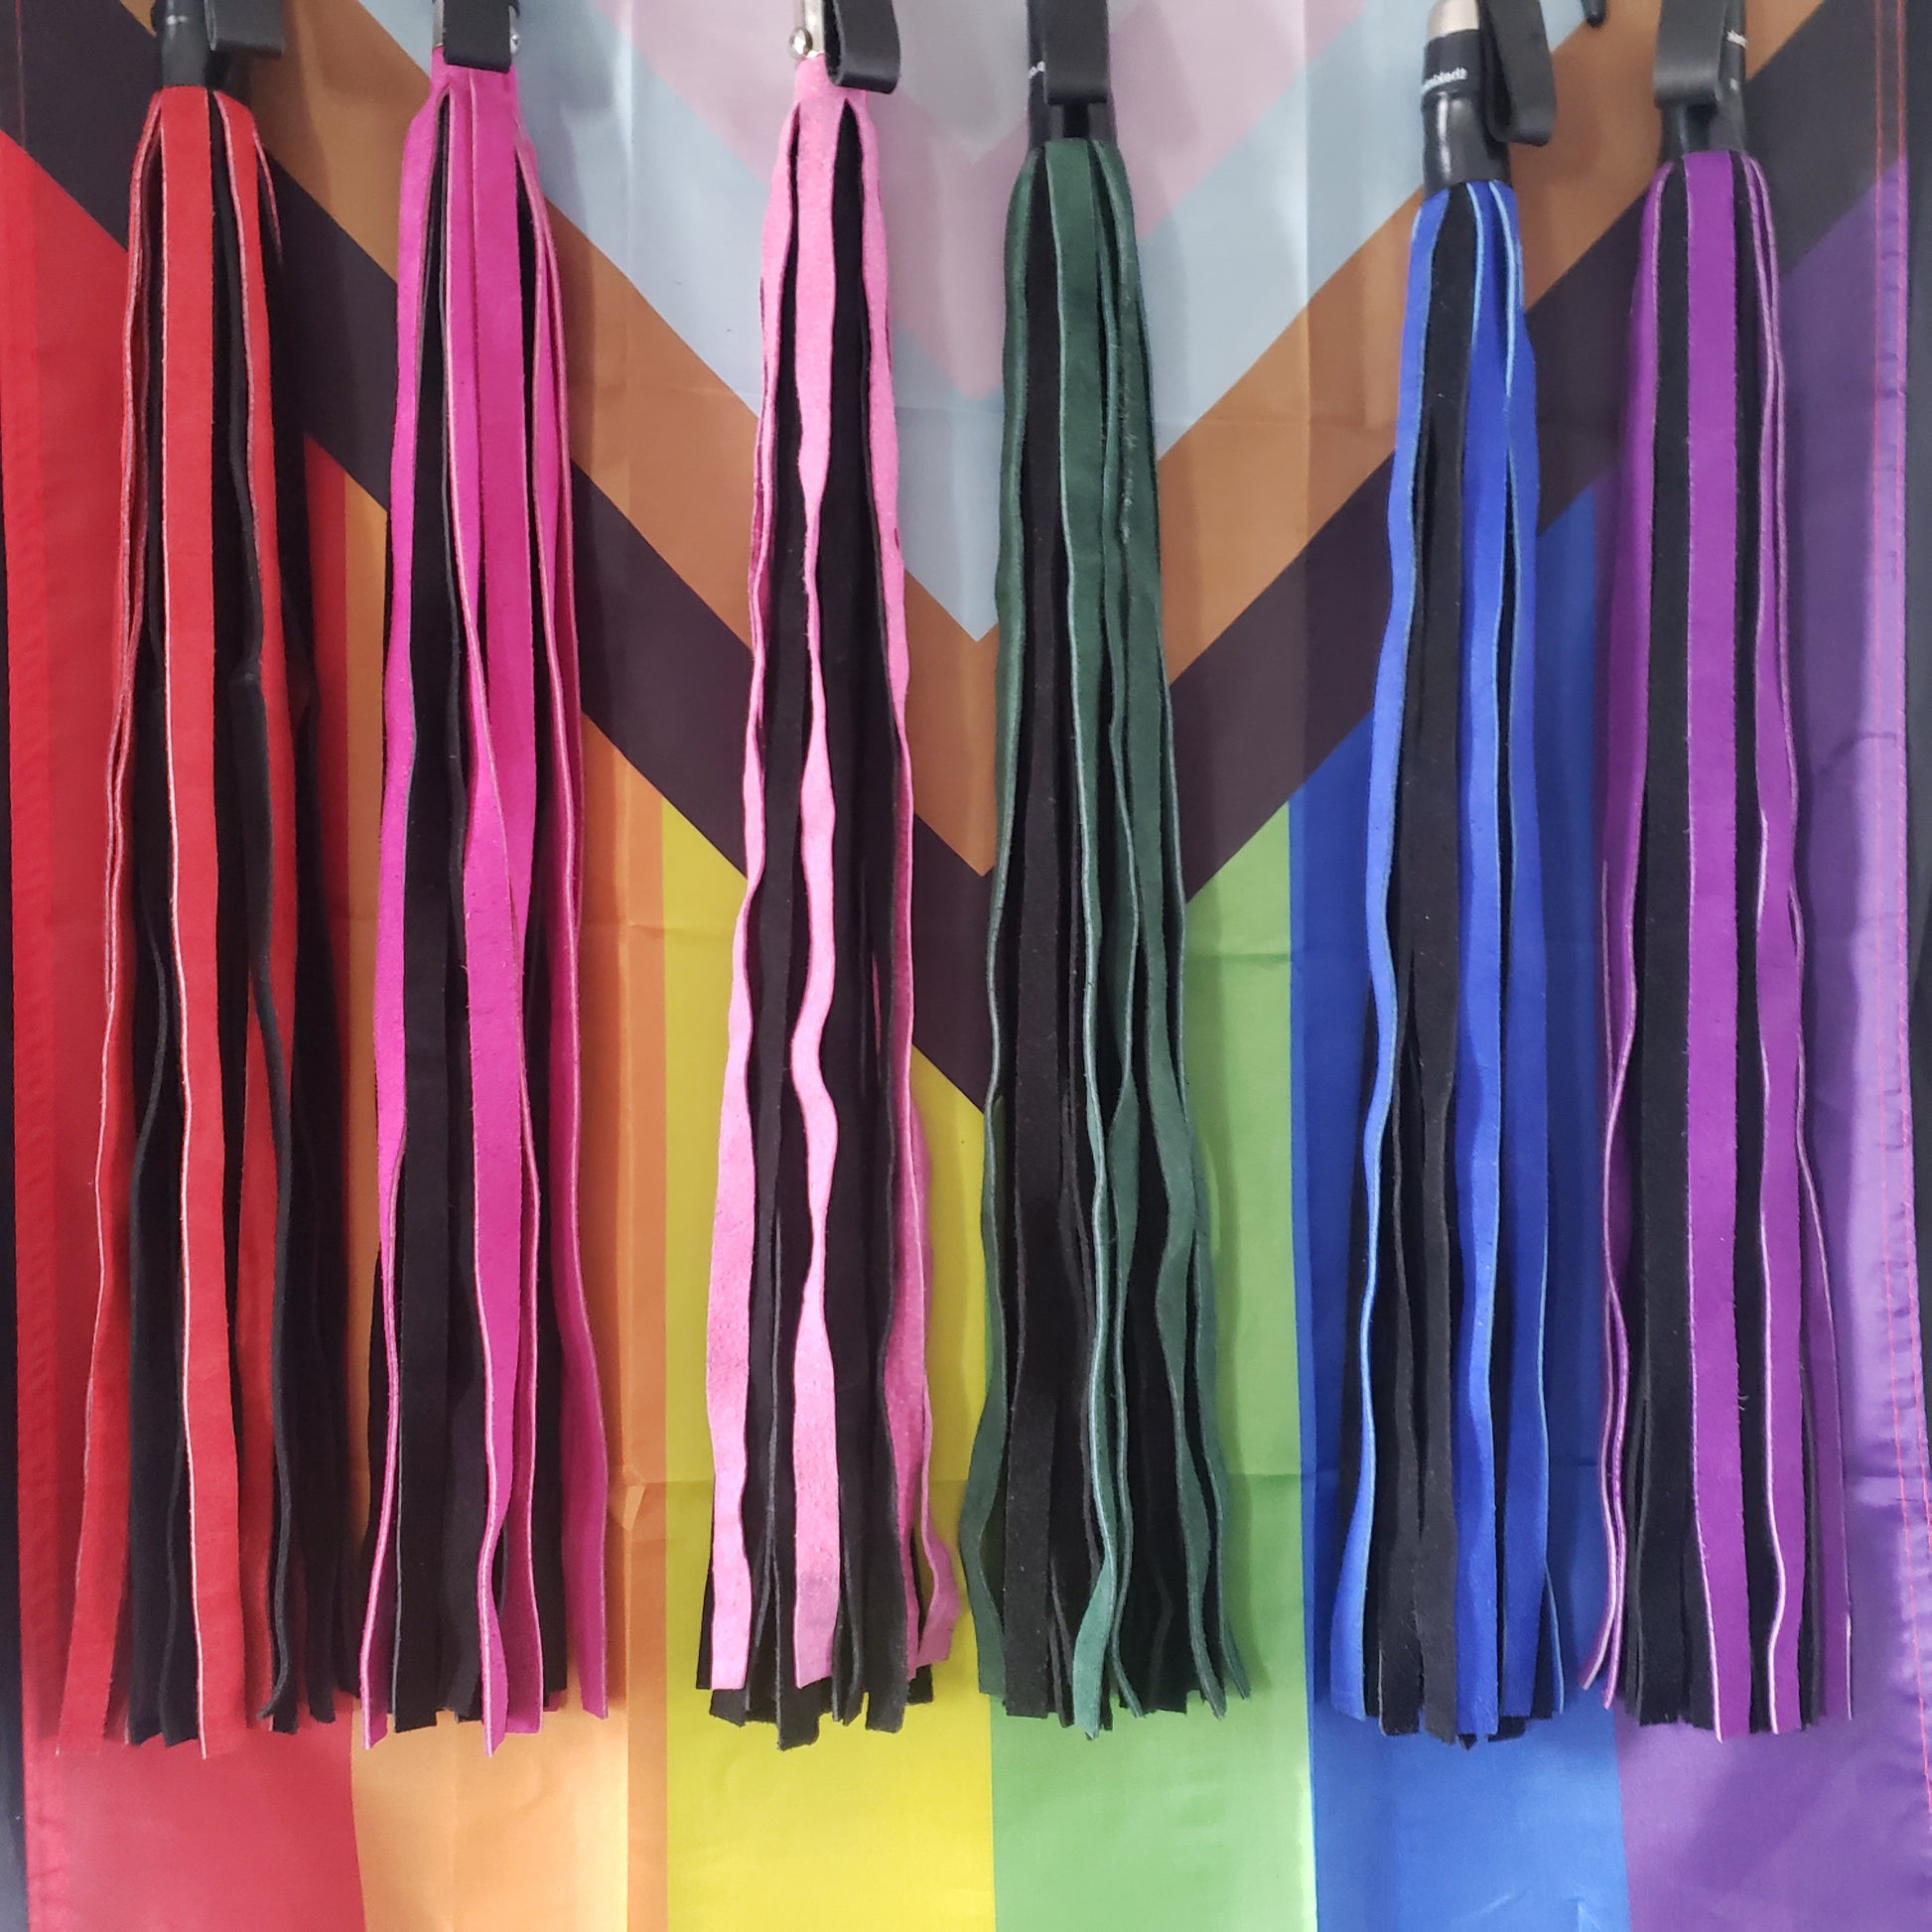 An assortment of colors of the Suede Finger Loop, Flogger in pink, purple, green, blue and red.